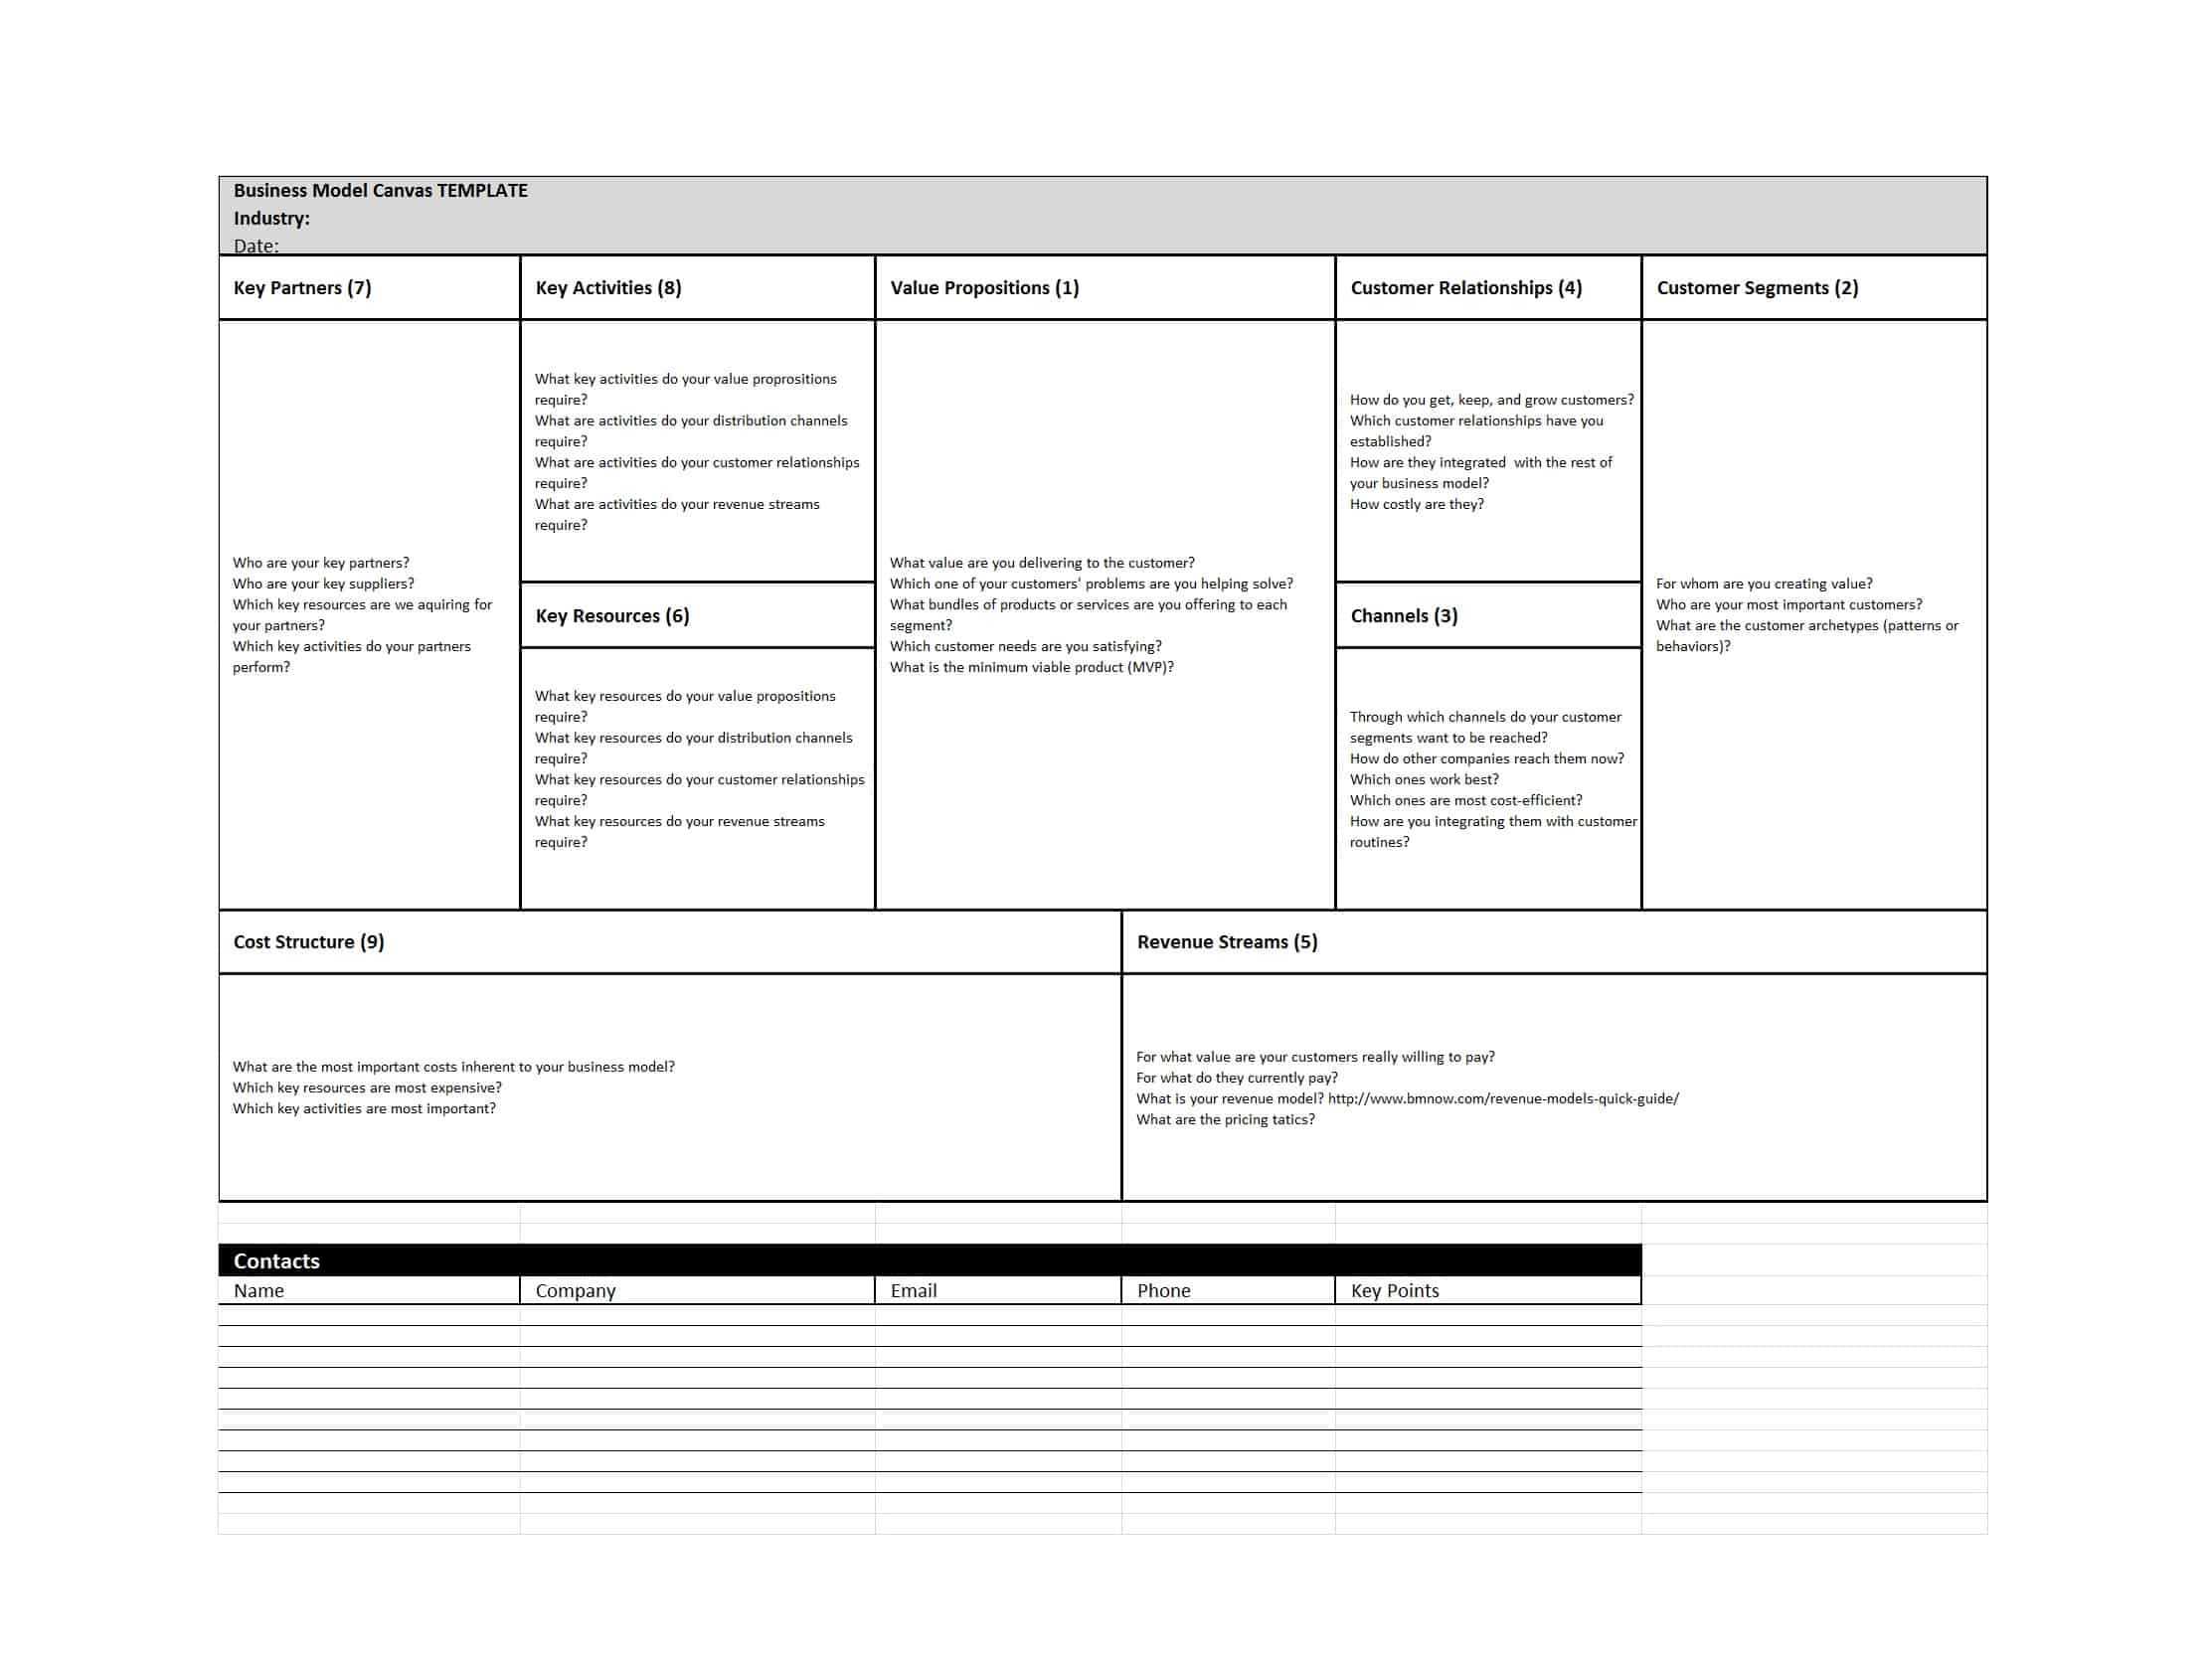 50 Amazing Business Model Canvas Templates ᐅ Templatelab Within Business Model Canvas Template Word